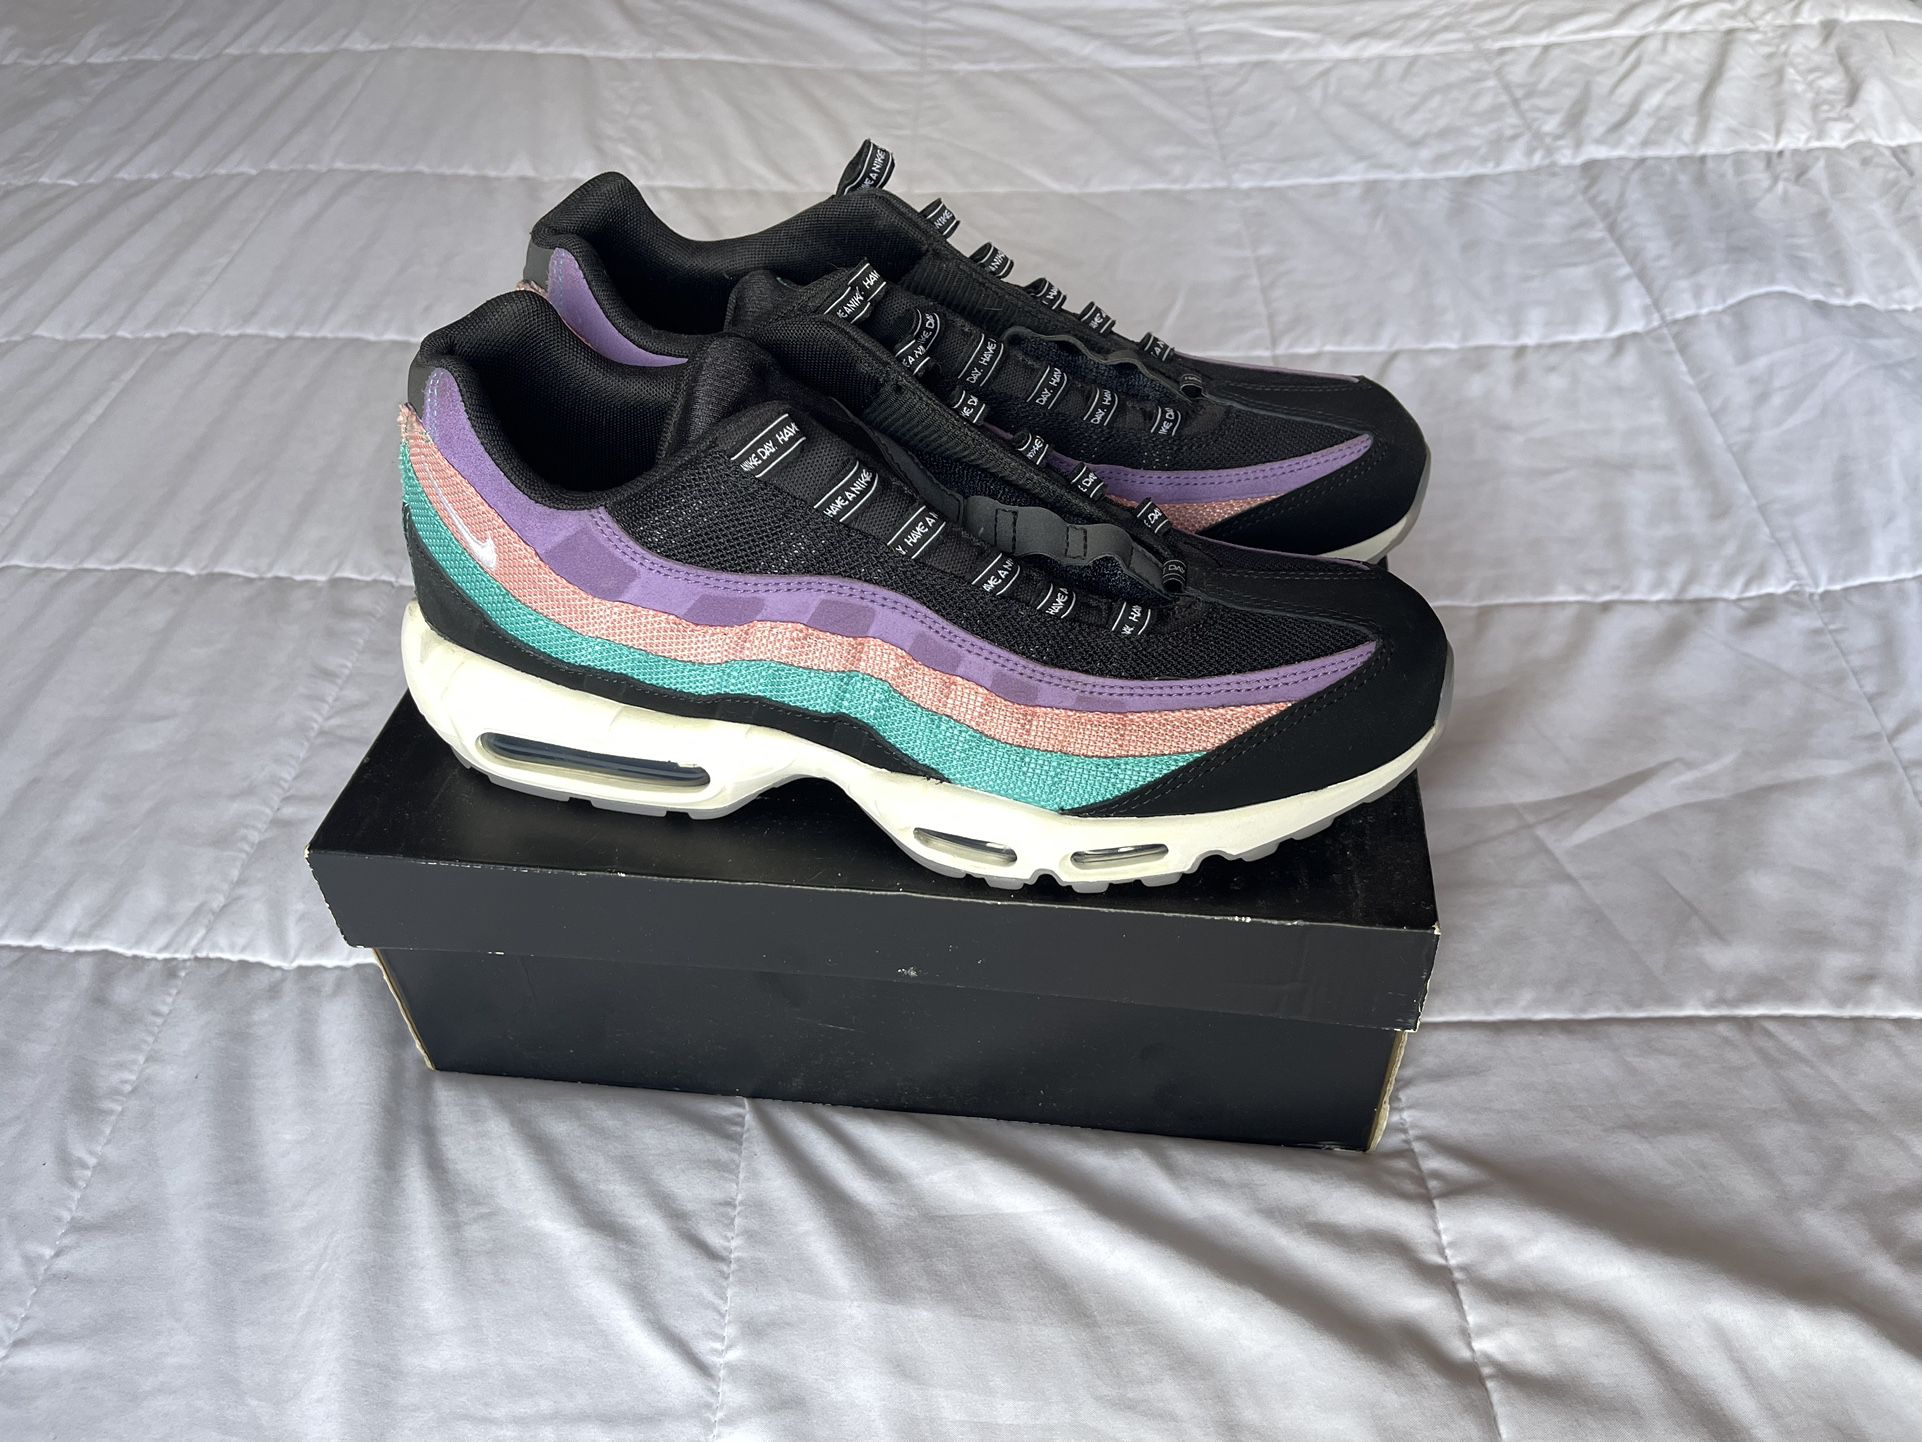 Nike Air Max 95 - Have A Nike Day Size 11